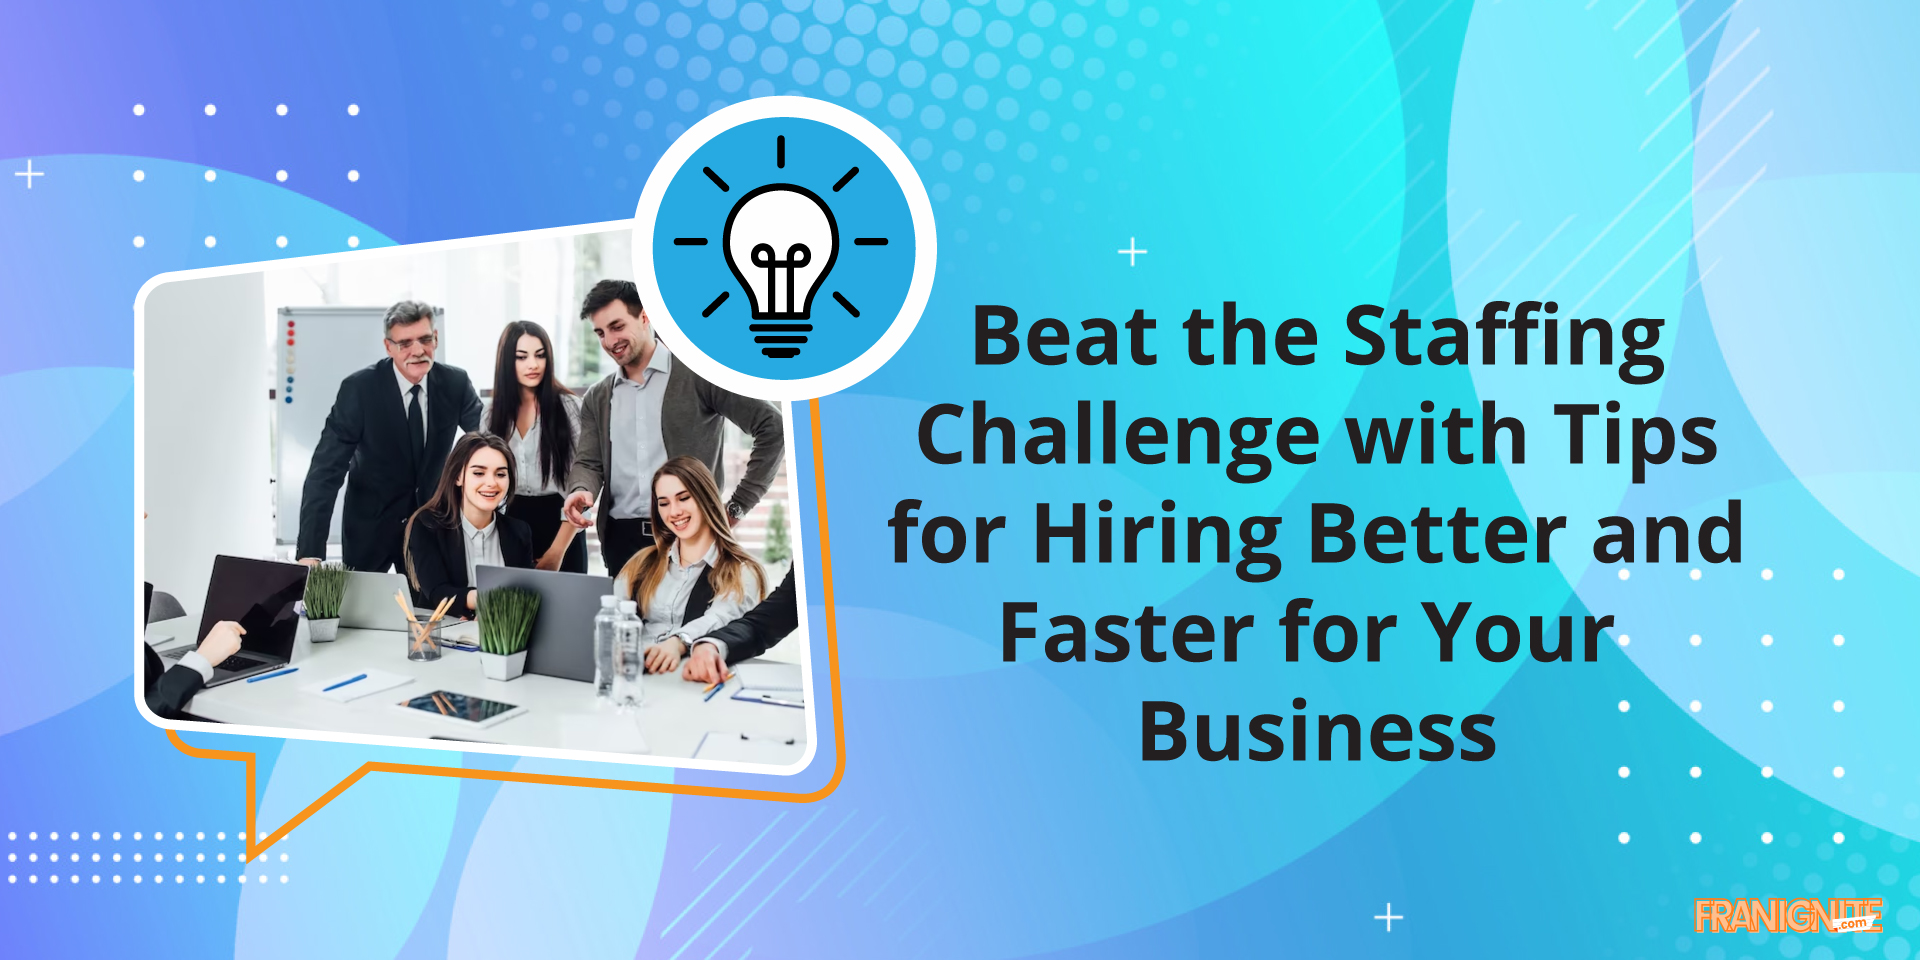 Beat the Staffing Challenge with Tips for Hiring Better and Faster for Your Business